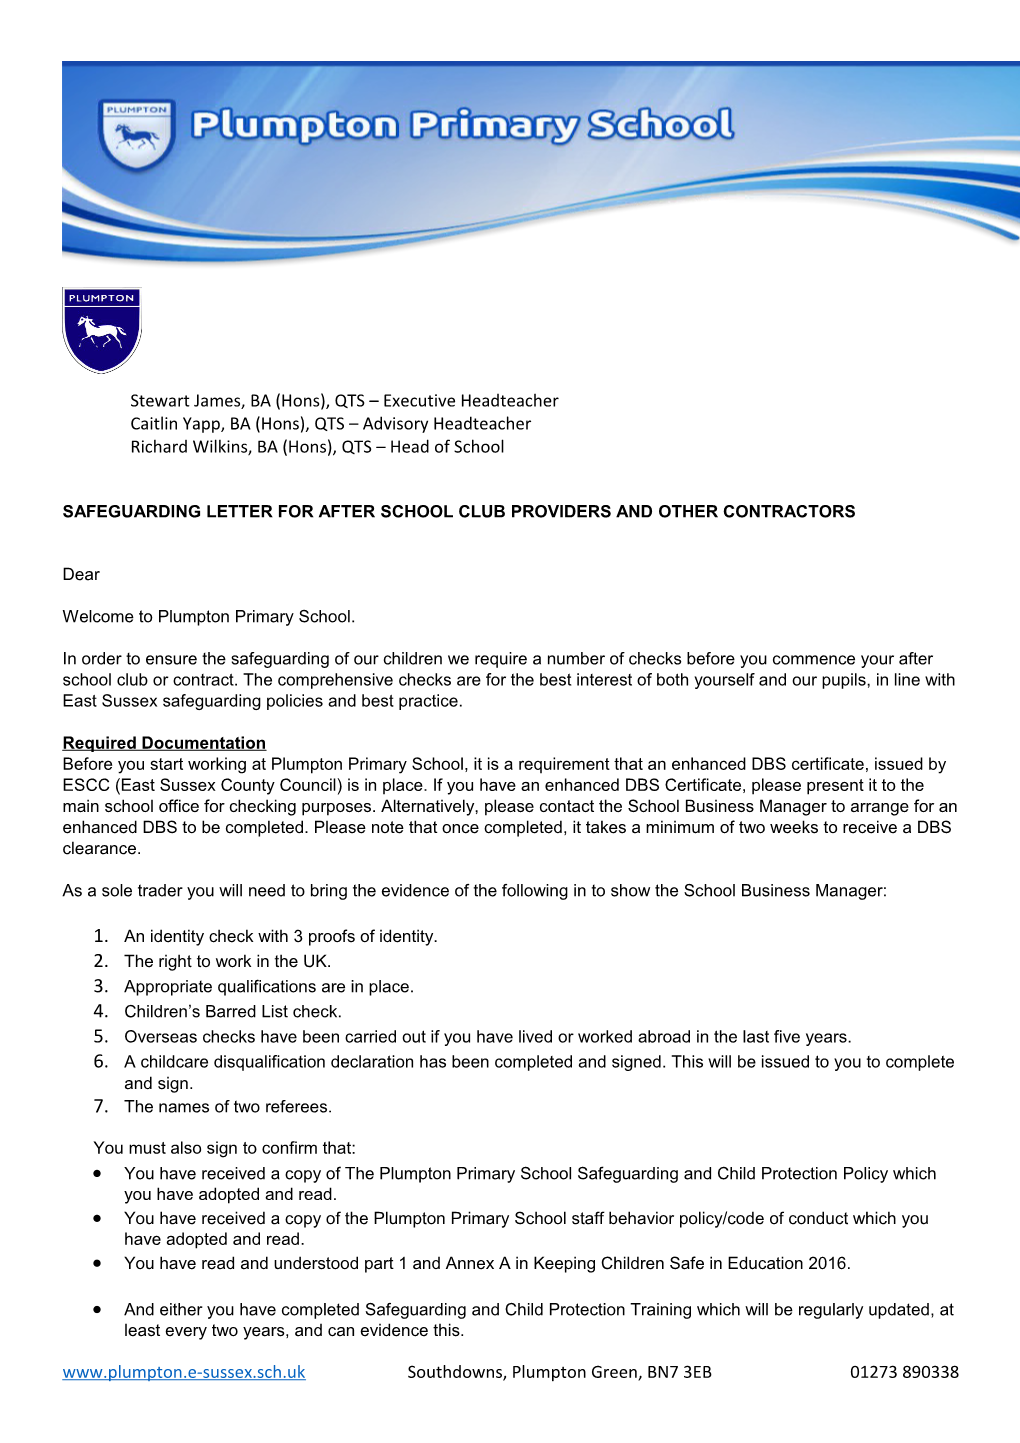 Safeguarding Letter for After School Club Providers and Other Contractors